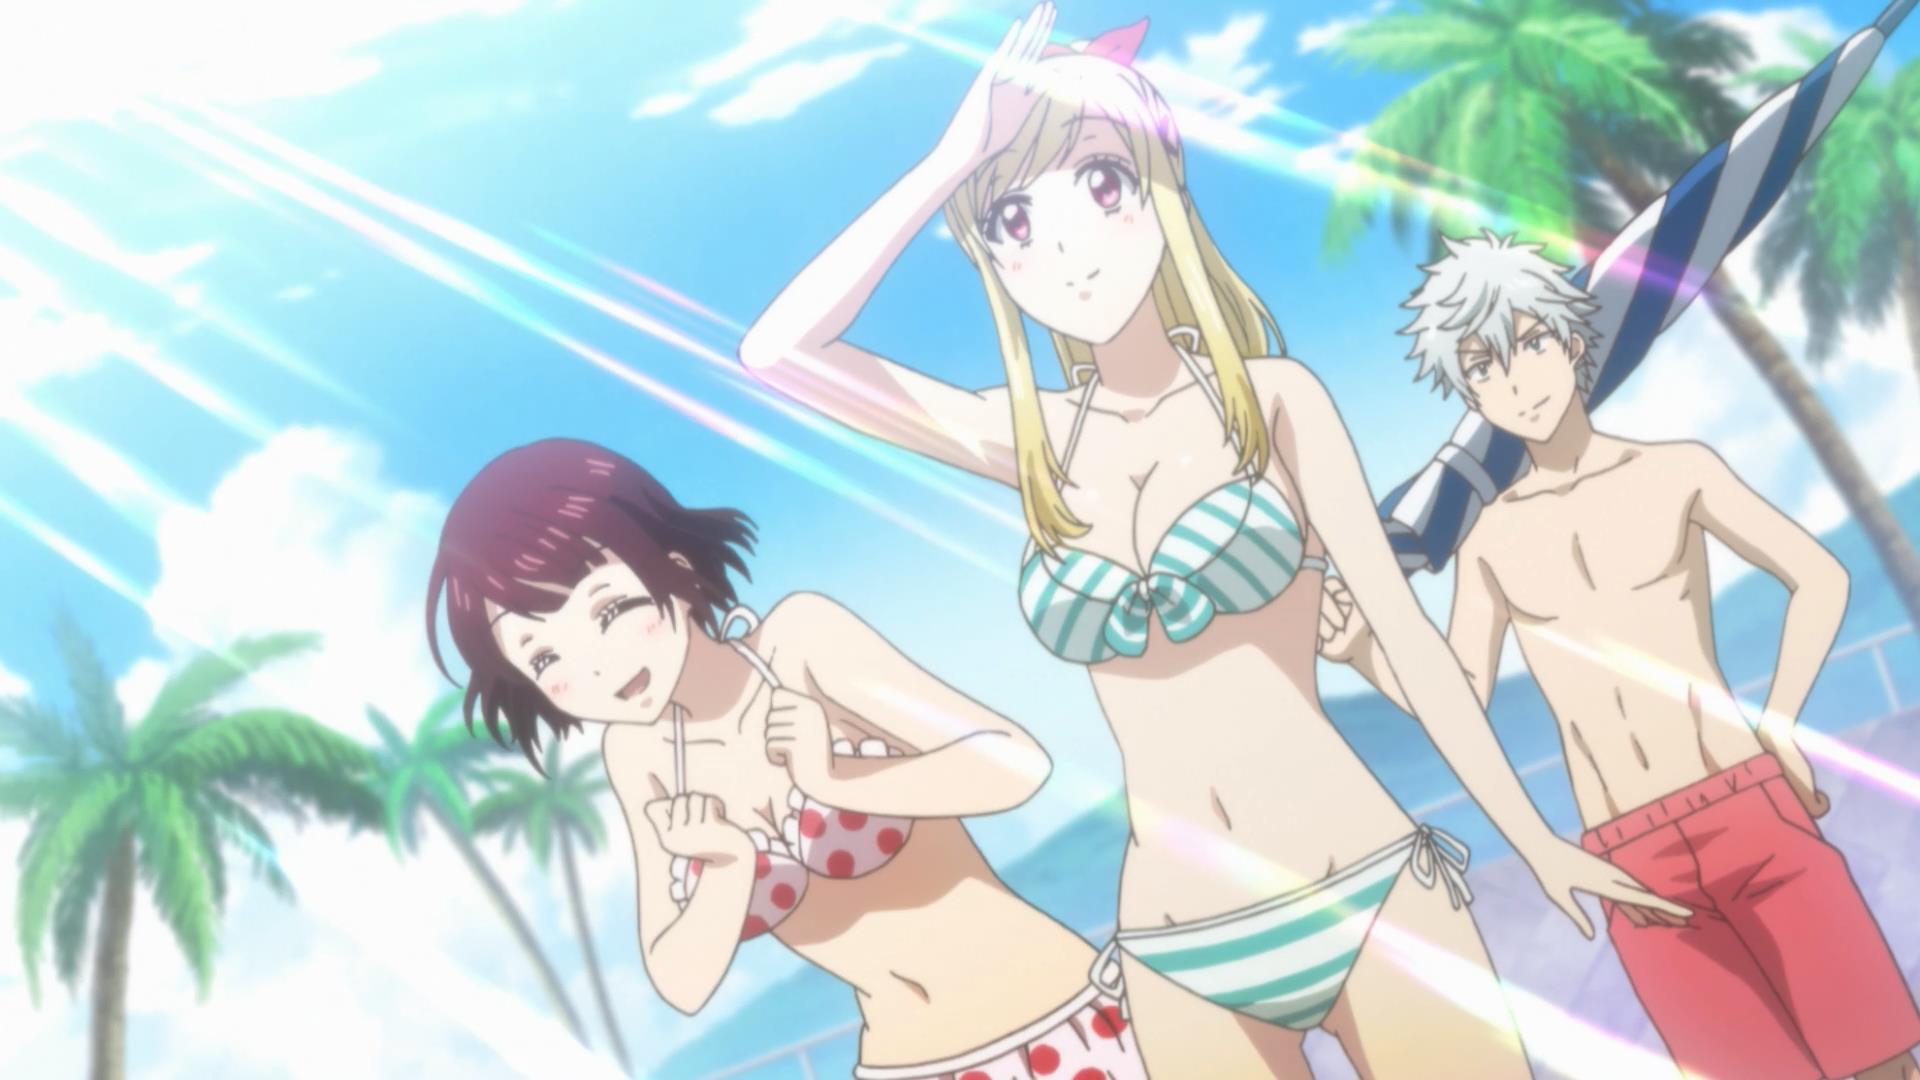 [HorribleSubs] Yamada-kun and the Seven Witches - 06 [1080p].mkv_snapshot_01.37_[2015.05.17_13.34.06]